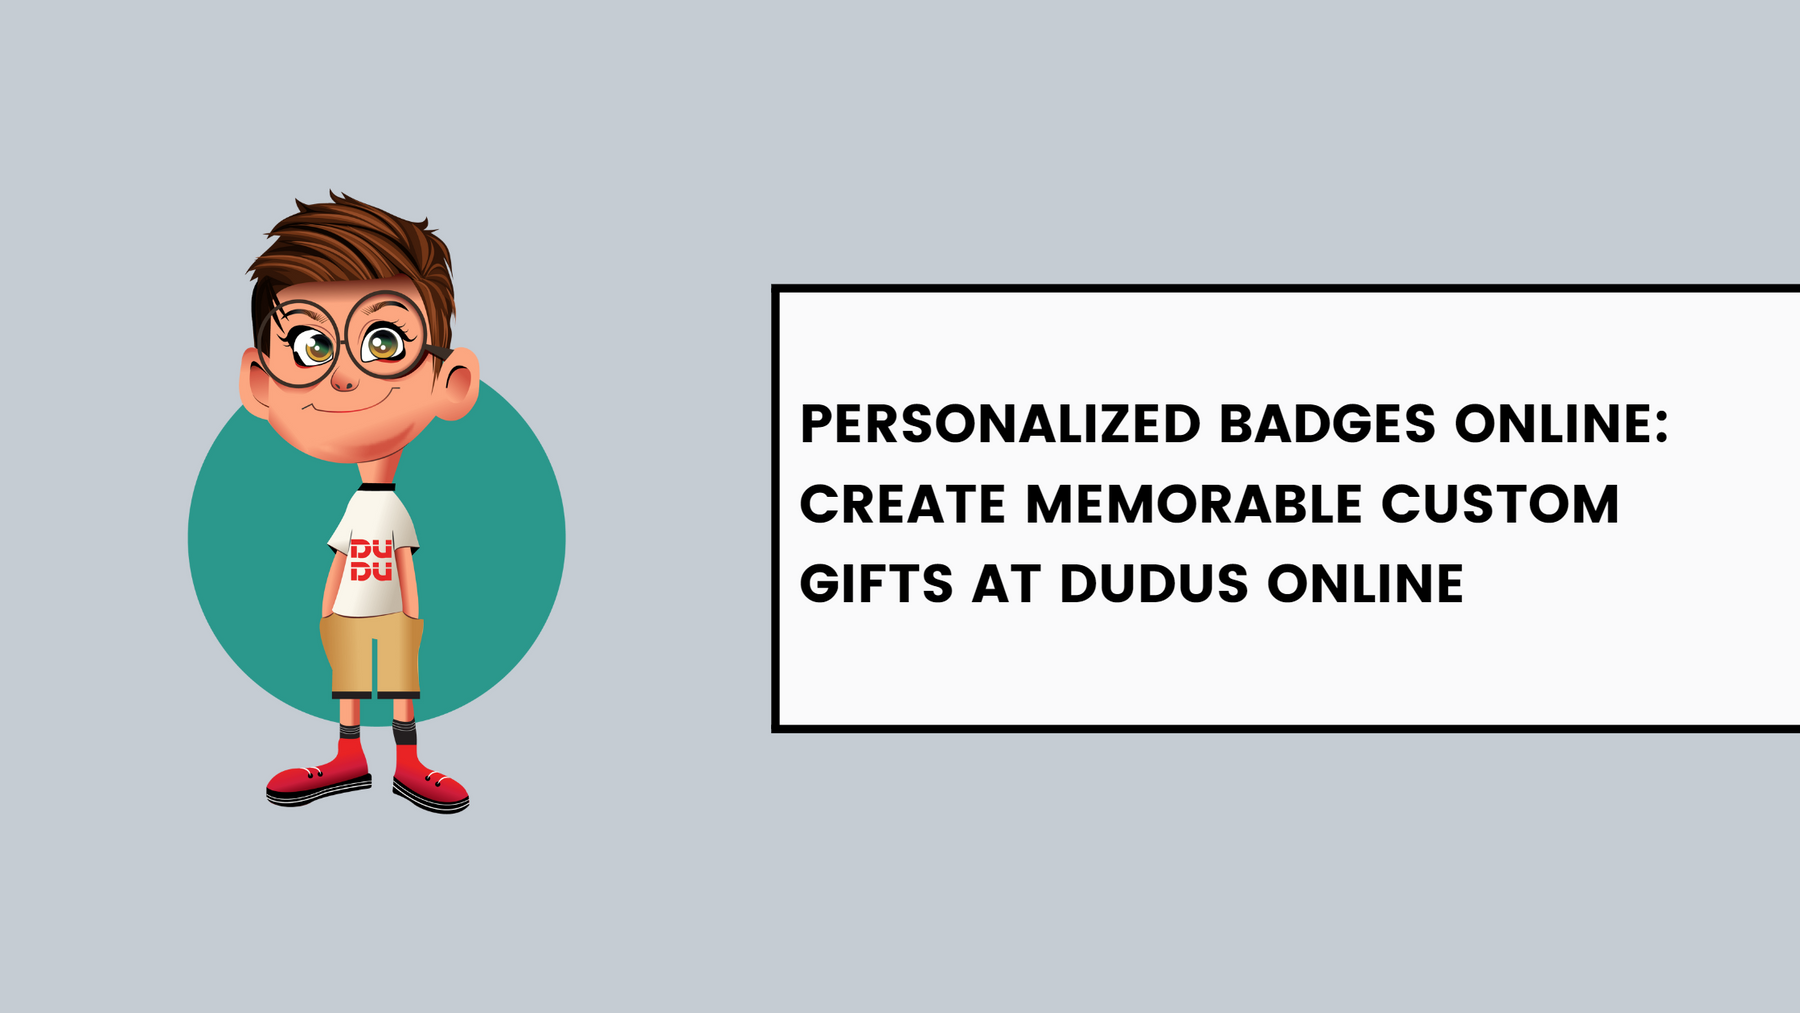 Personalized Badges Online: Create Memorable Custom Gifts at Dudus Online